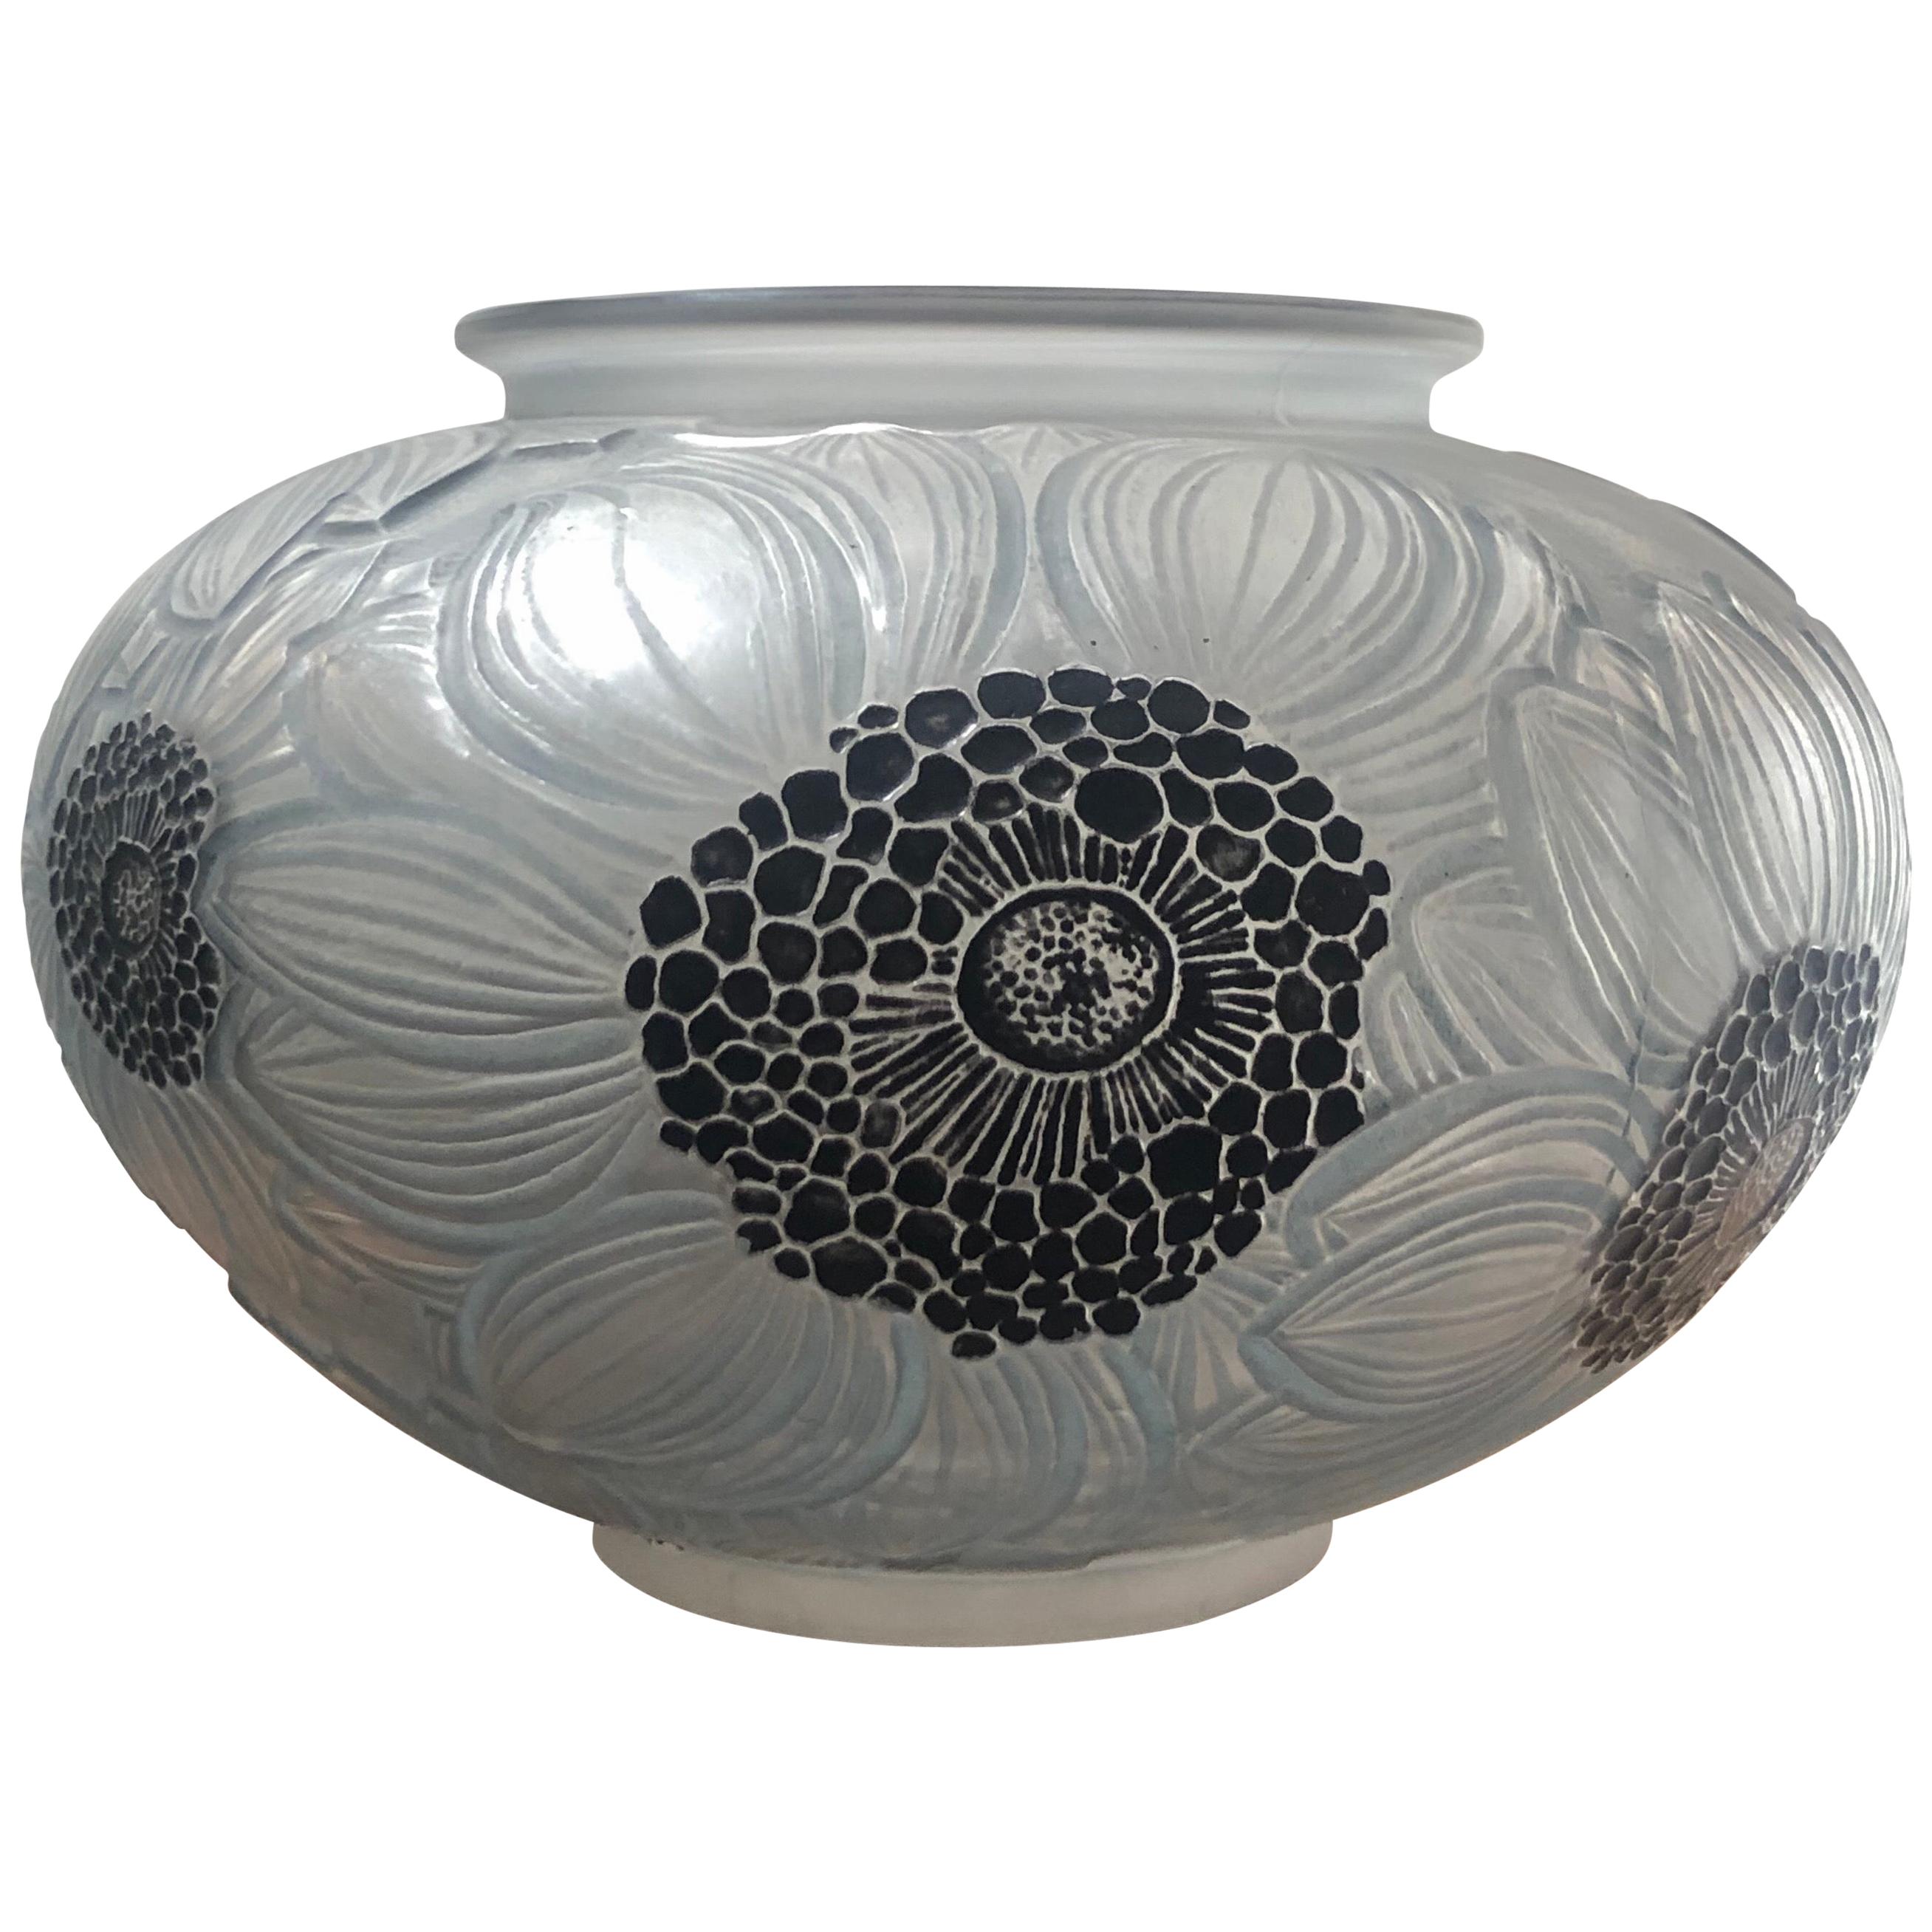 1923 René Lalique Dahlias Vase in Frosted, Black Enamel and Blue Stained Glass